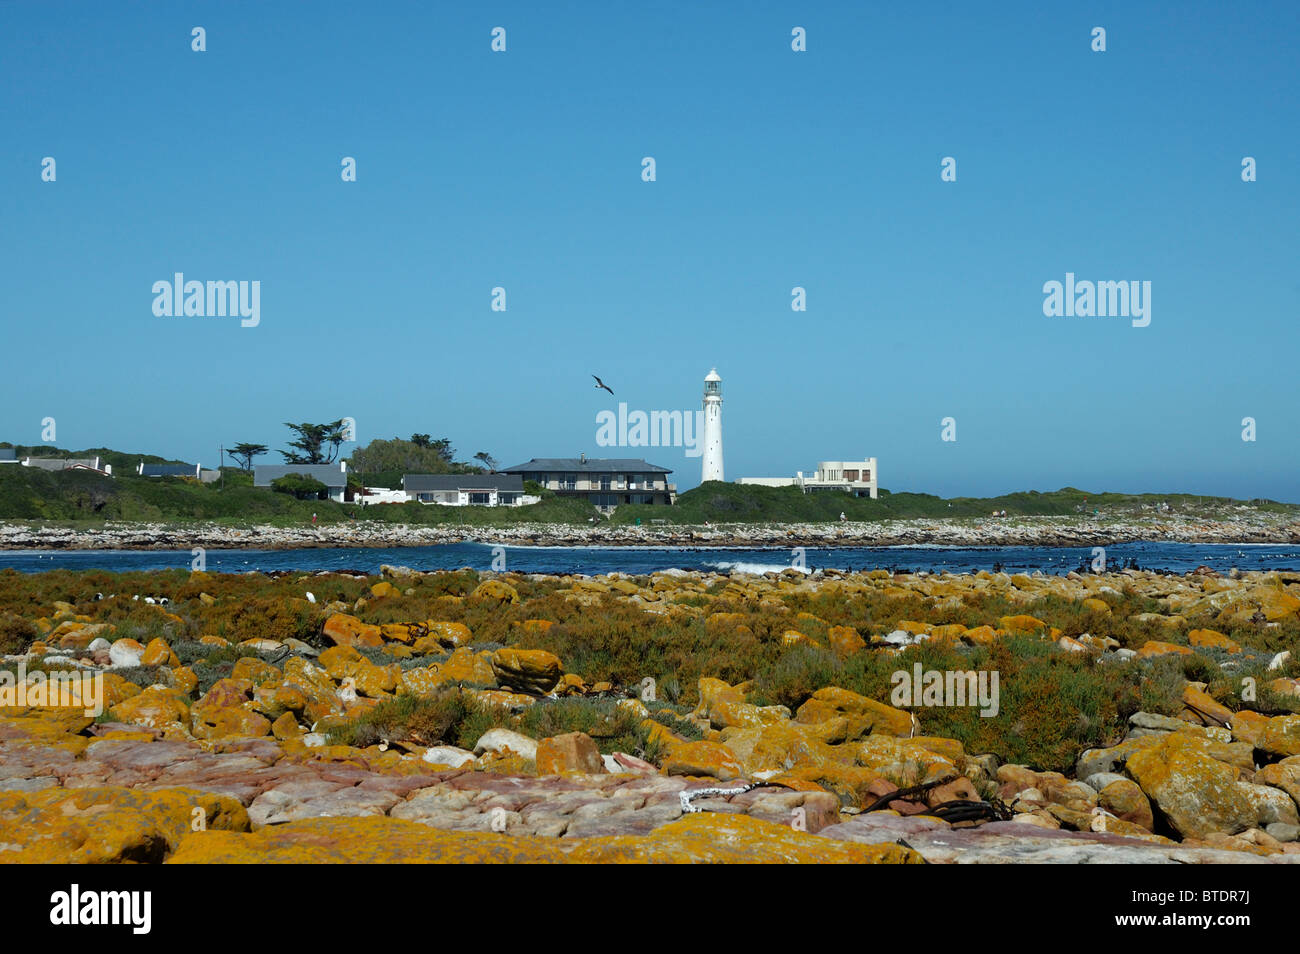 A rocky beach and a lighthouse in the background Stock Photo